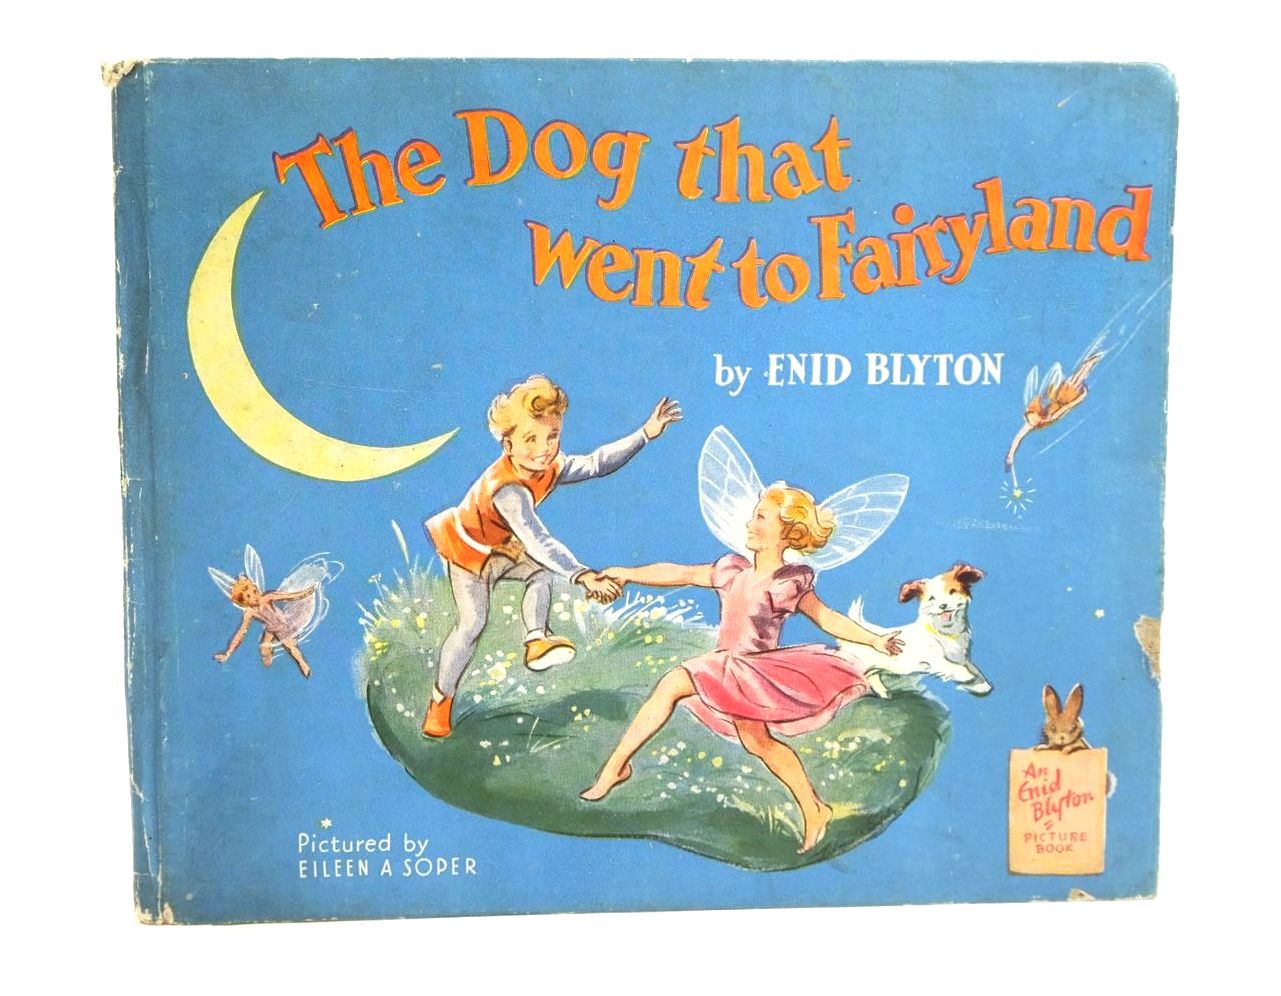 Photo of THE DOG THAT WENT TO FAIRYLAND written by Blyton, Enid illustrated by Soper, Eileen published by The Brockhampton Book Co. Ltd. (STOCK CODE: 1319928)  for sale by Stella & Rose's Books